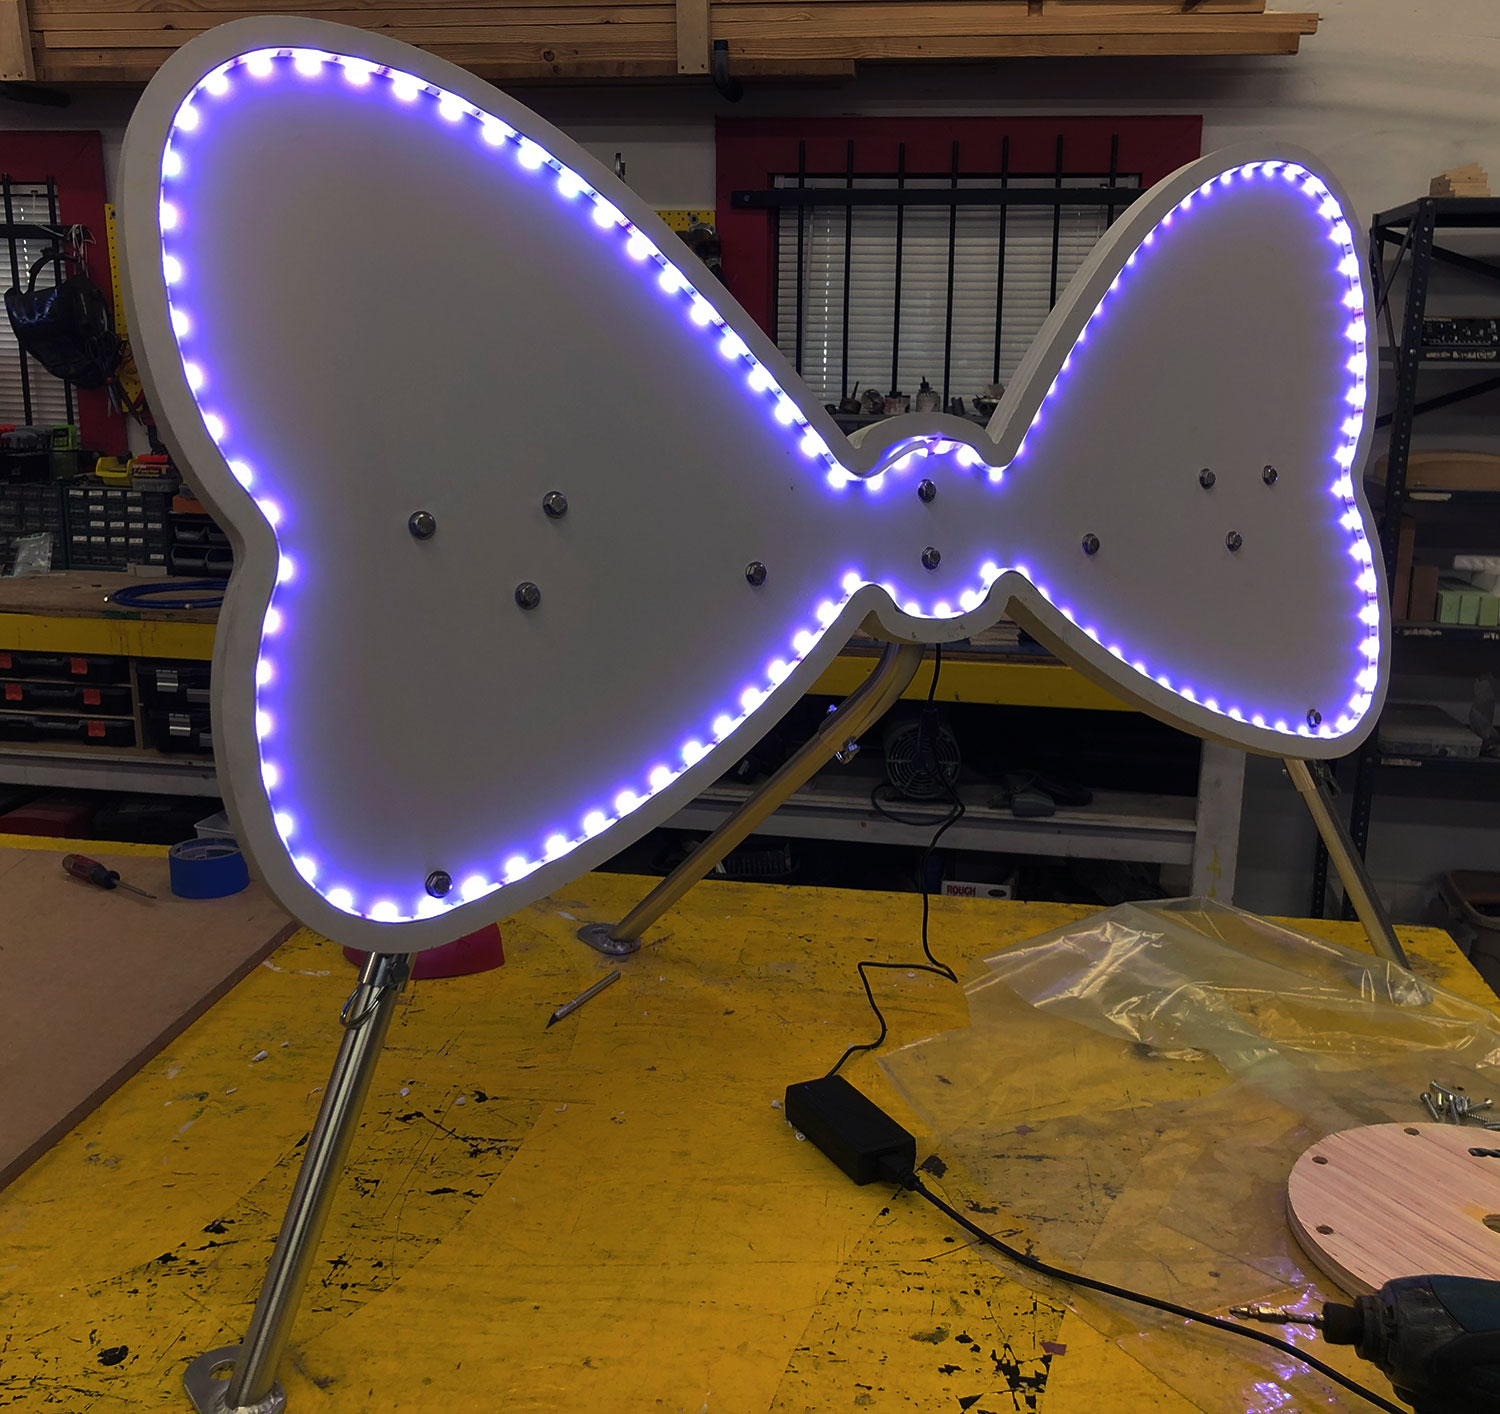 bowtie stand with LED lights around it